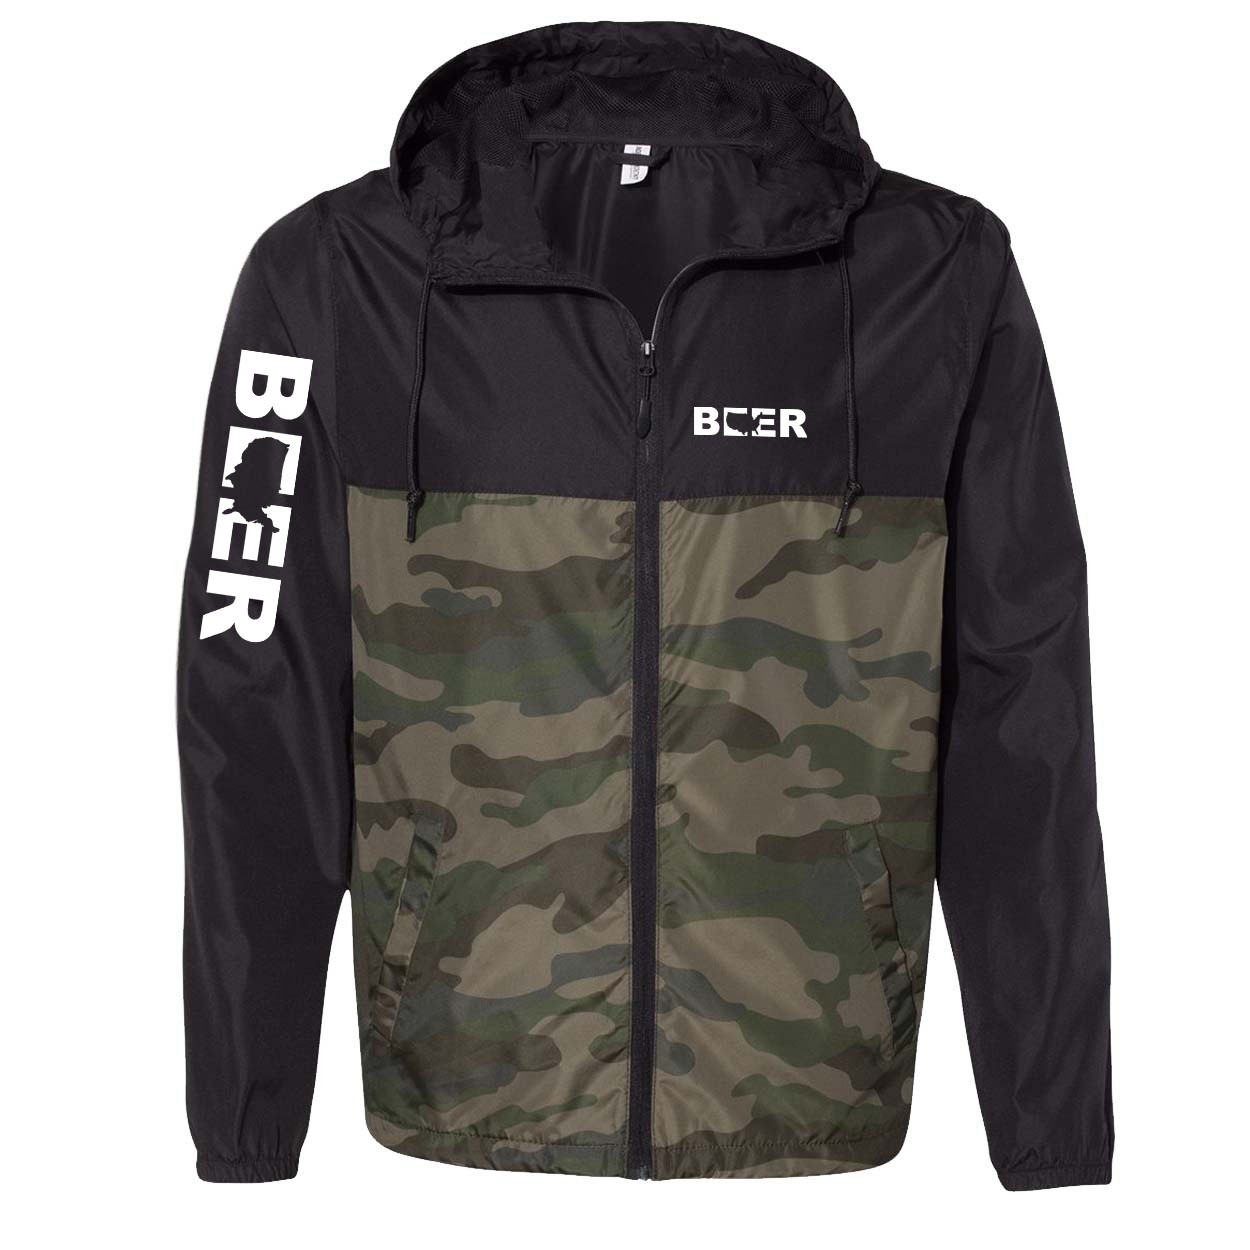 Beer United States Classic Lightweight Windbreaker Black/Forest Camo (White Logo)